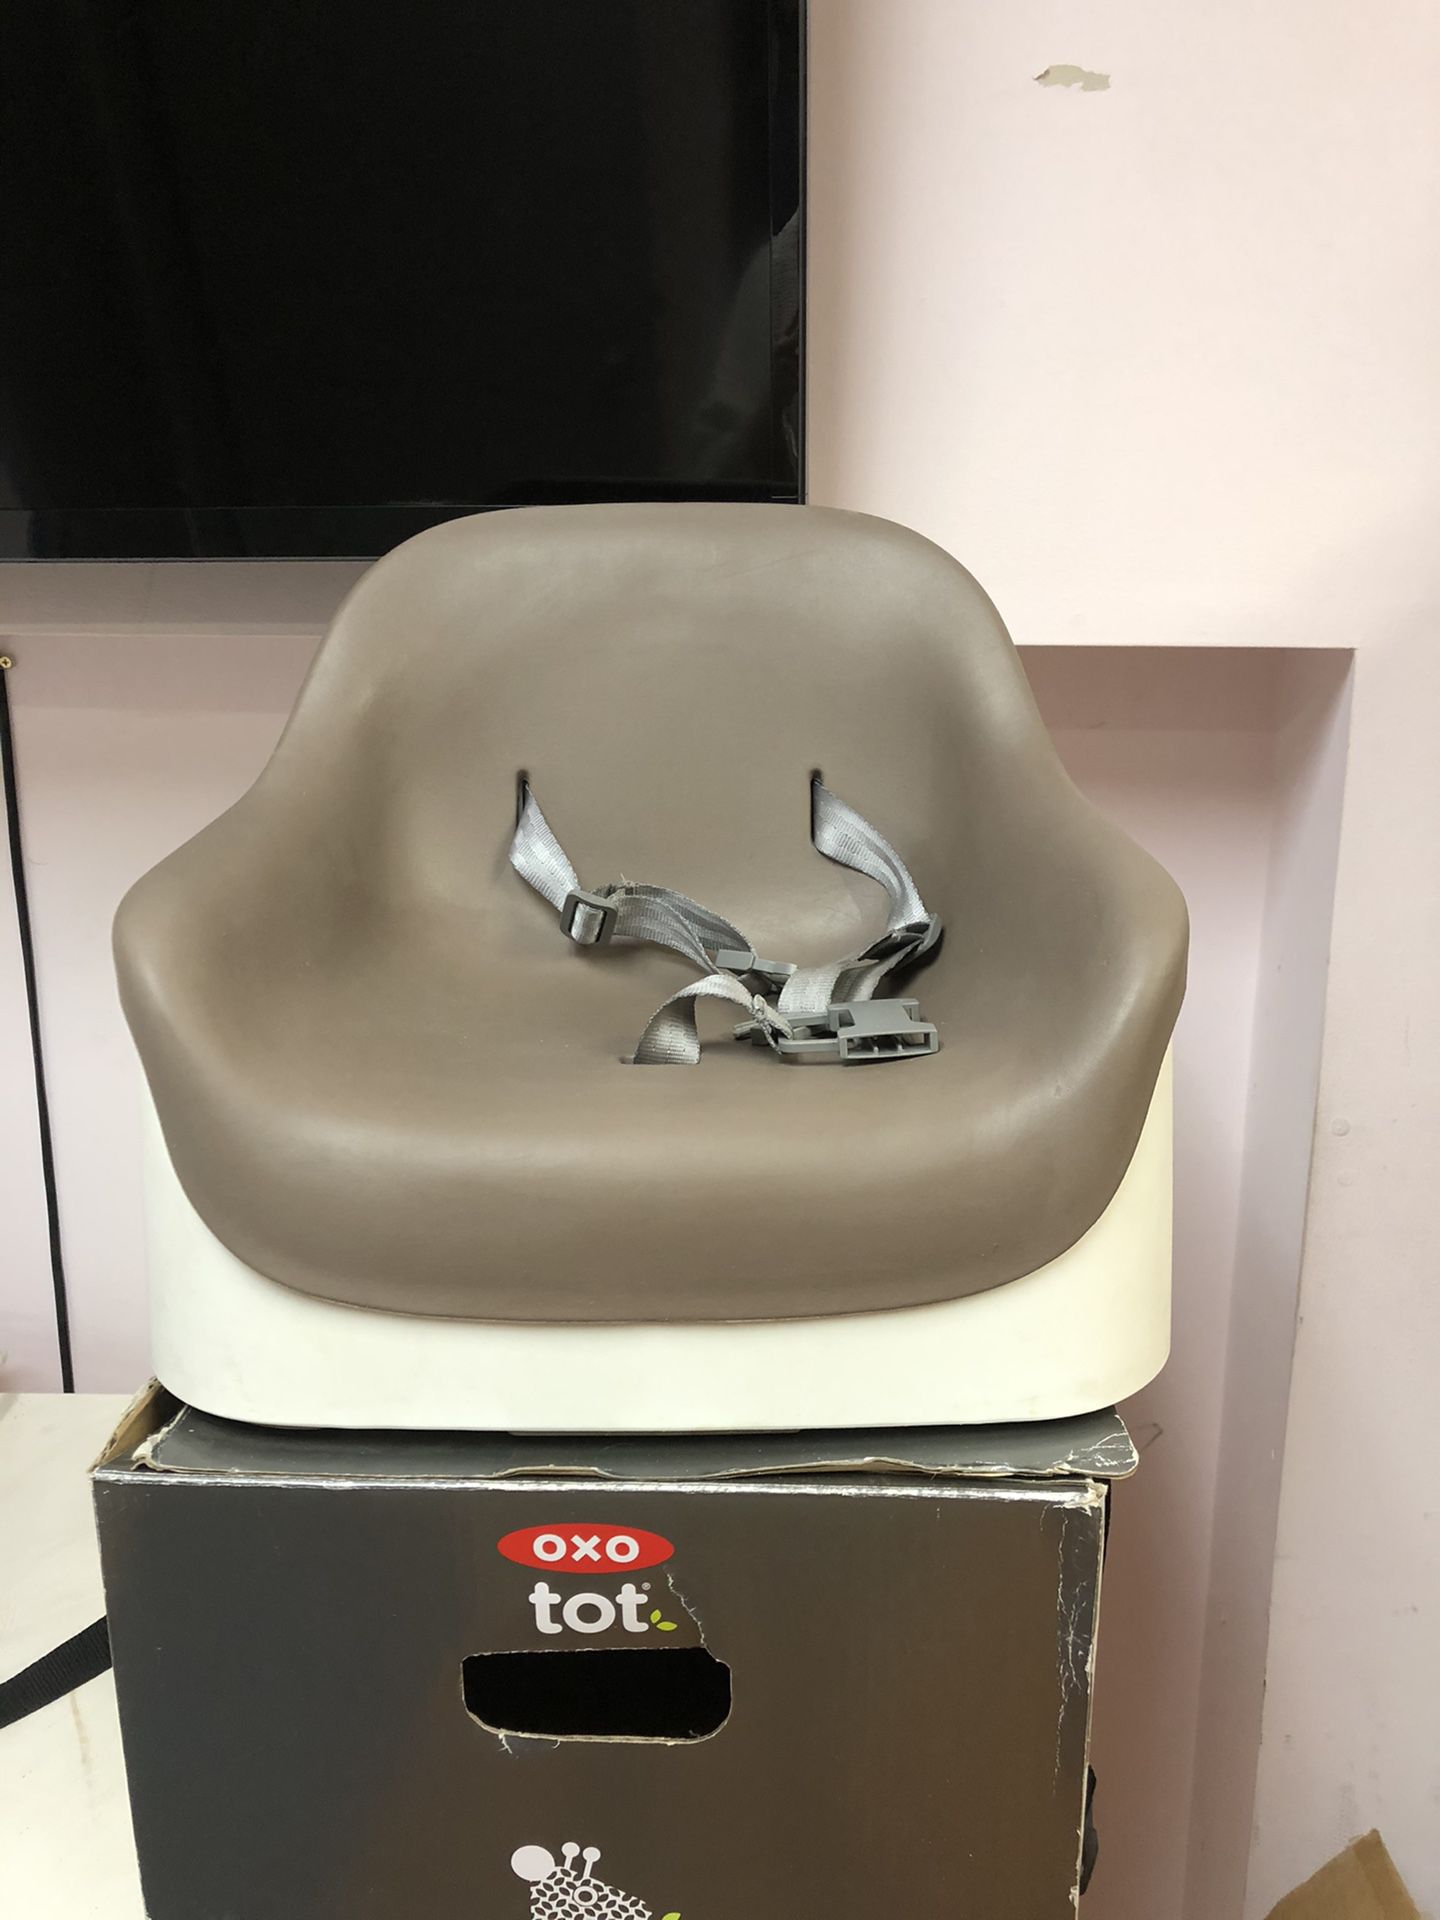 Oxo tot nest booster seat with straps